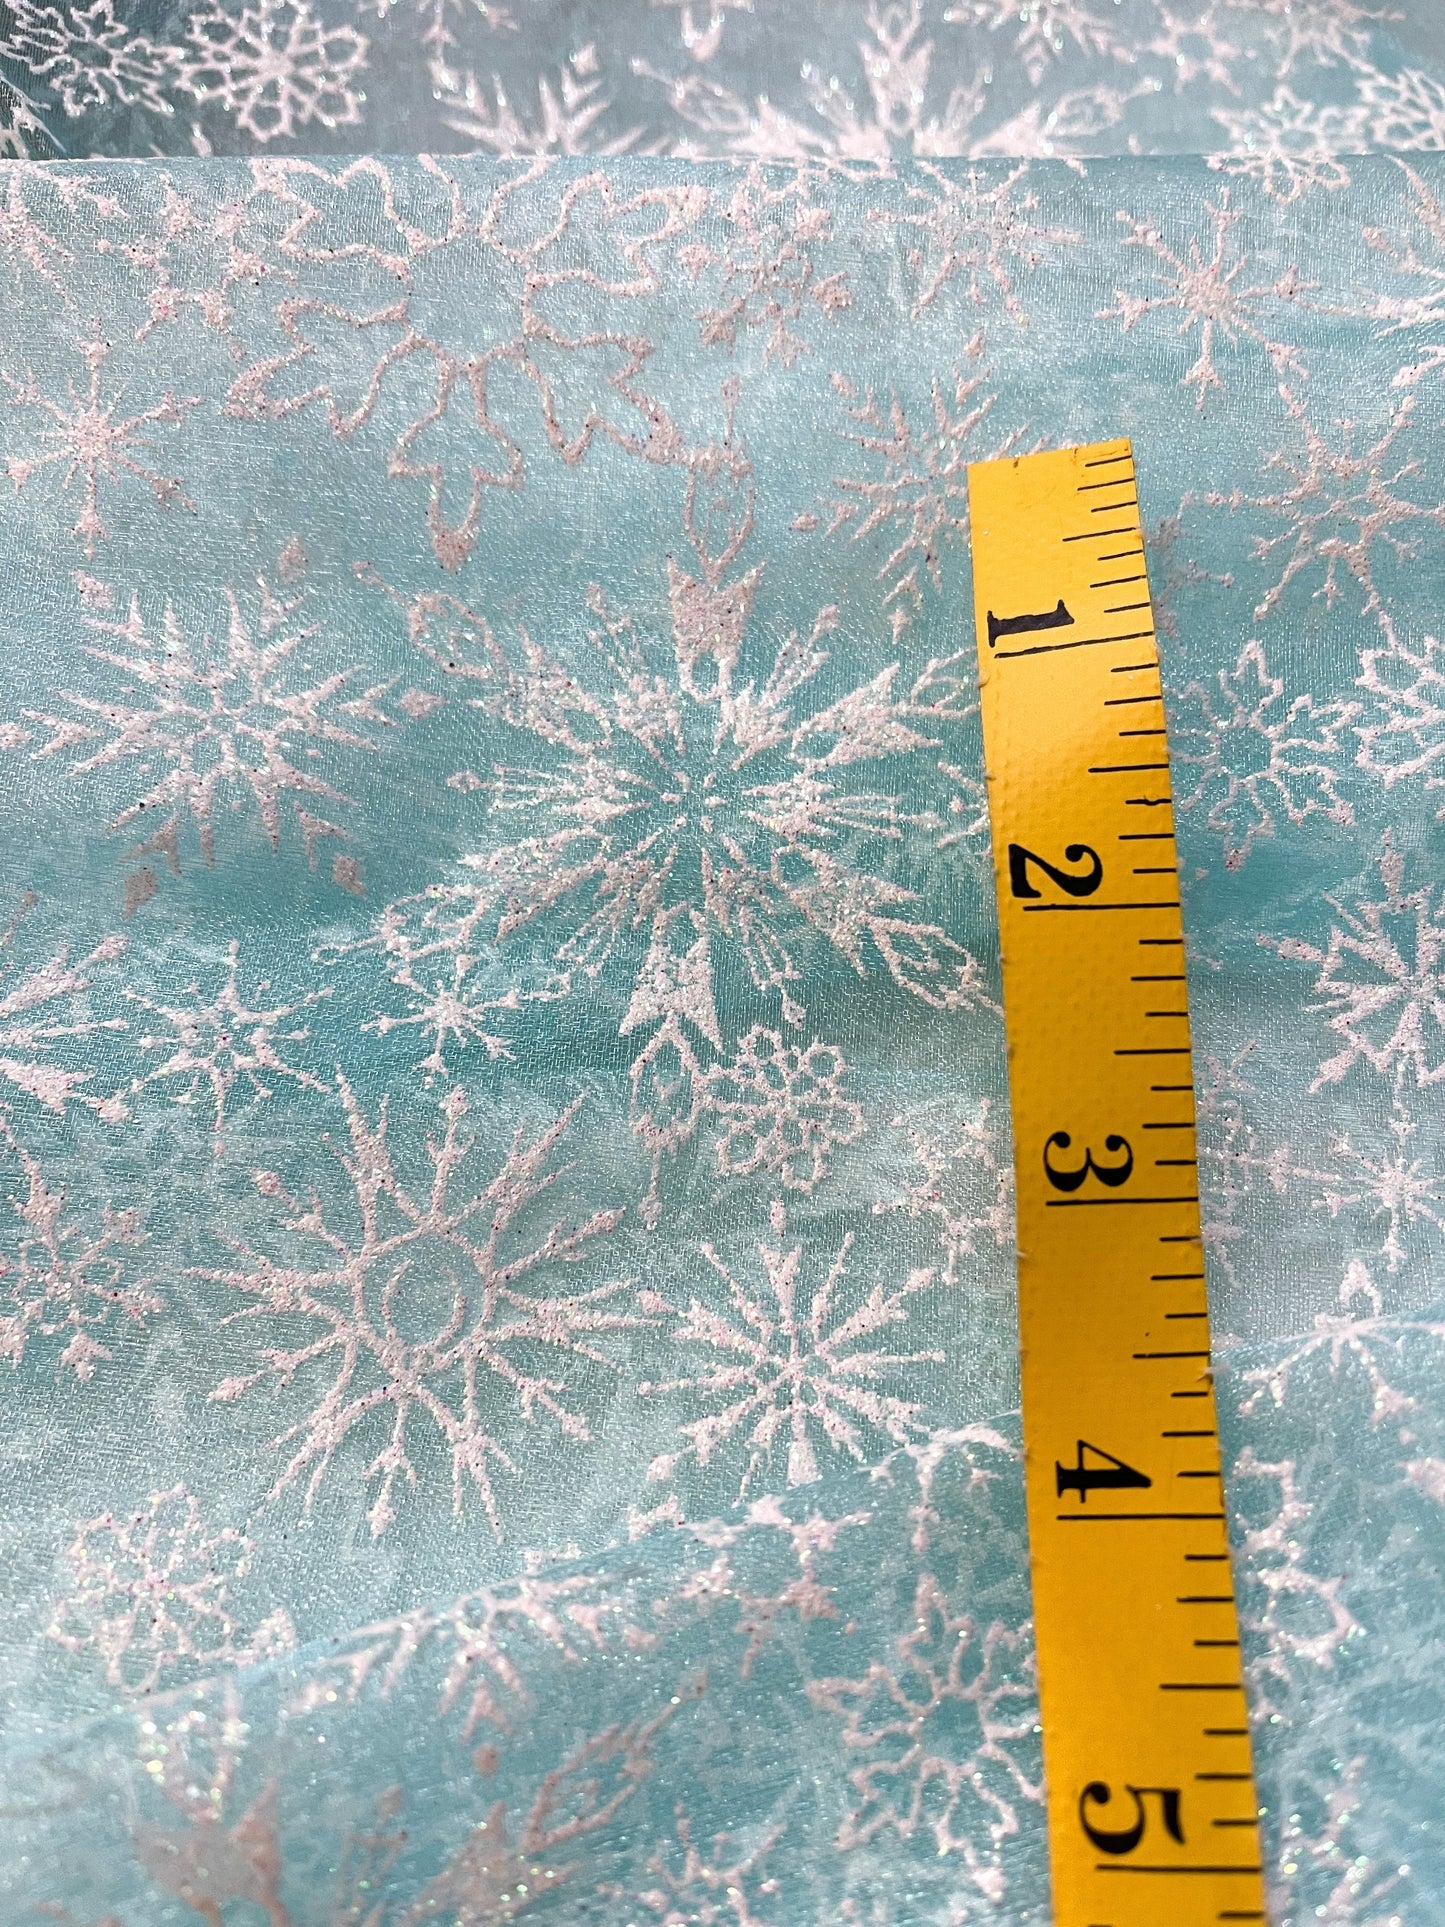 Clearance -pale blue shimmer with white glitter snowflakes precut